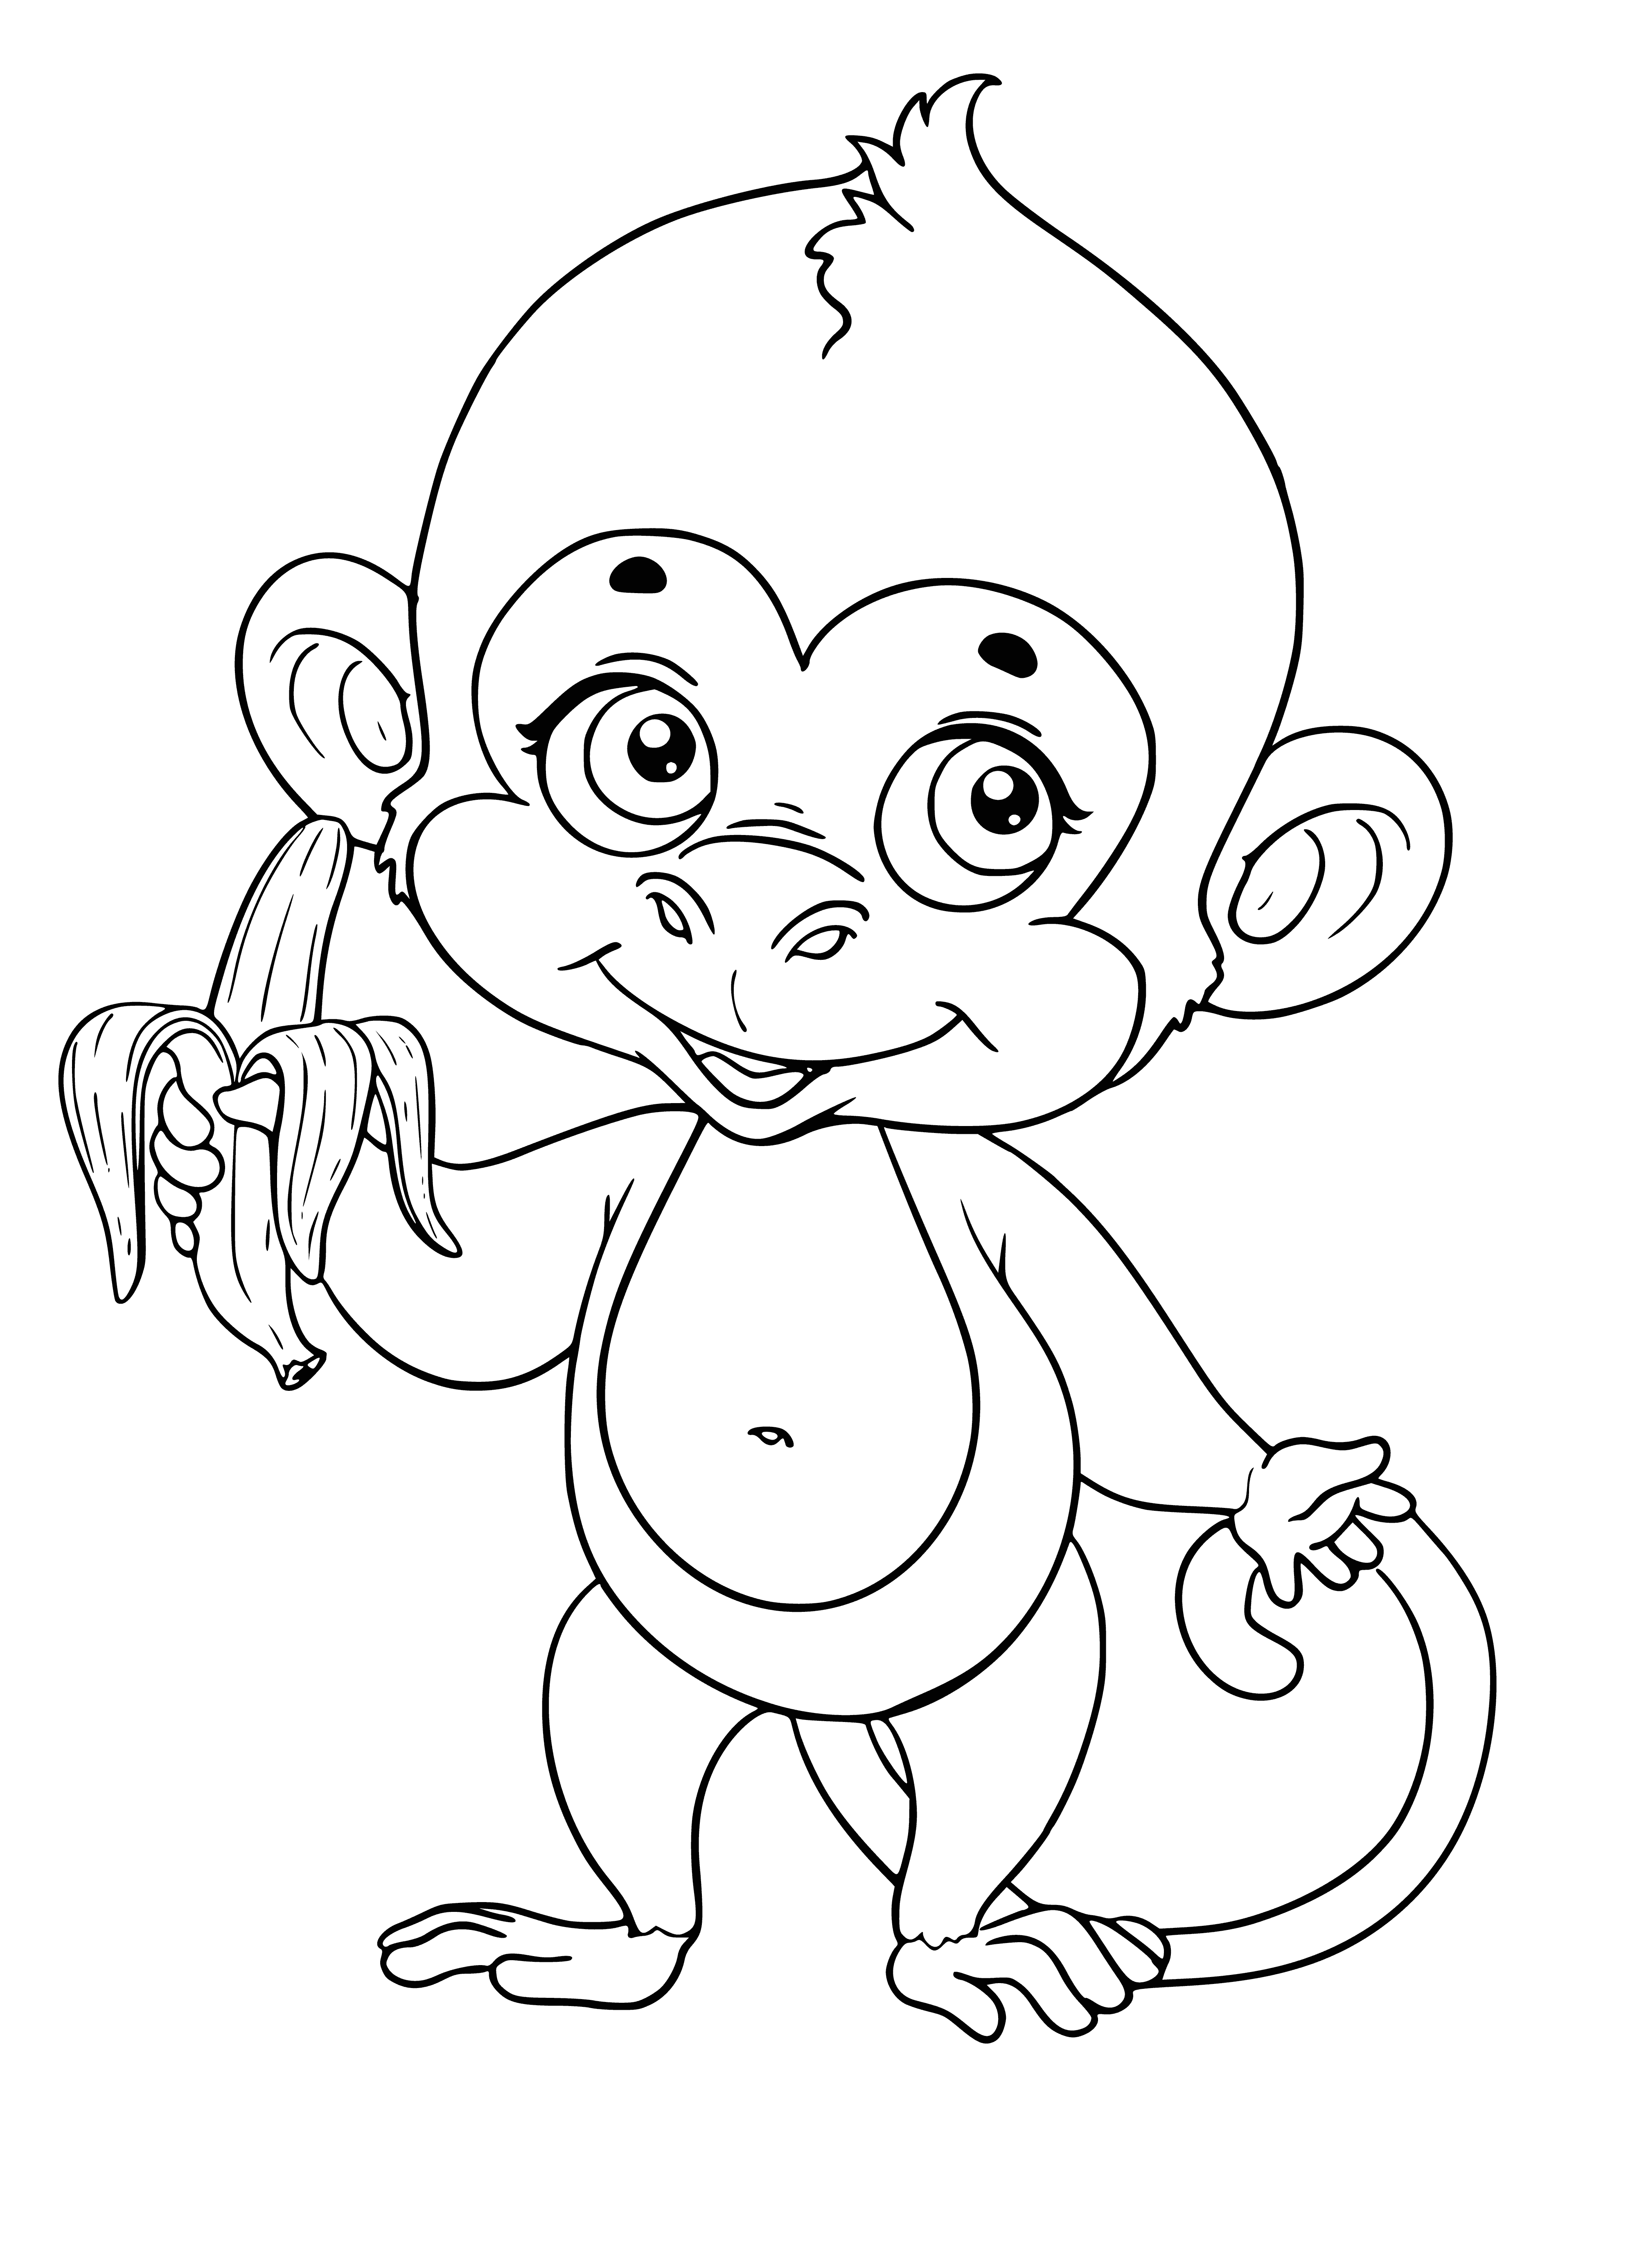 Monkey with a banana coloring page